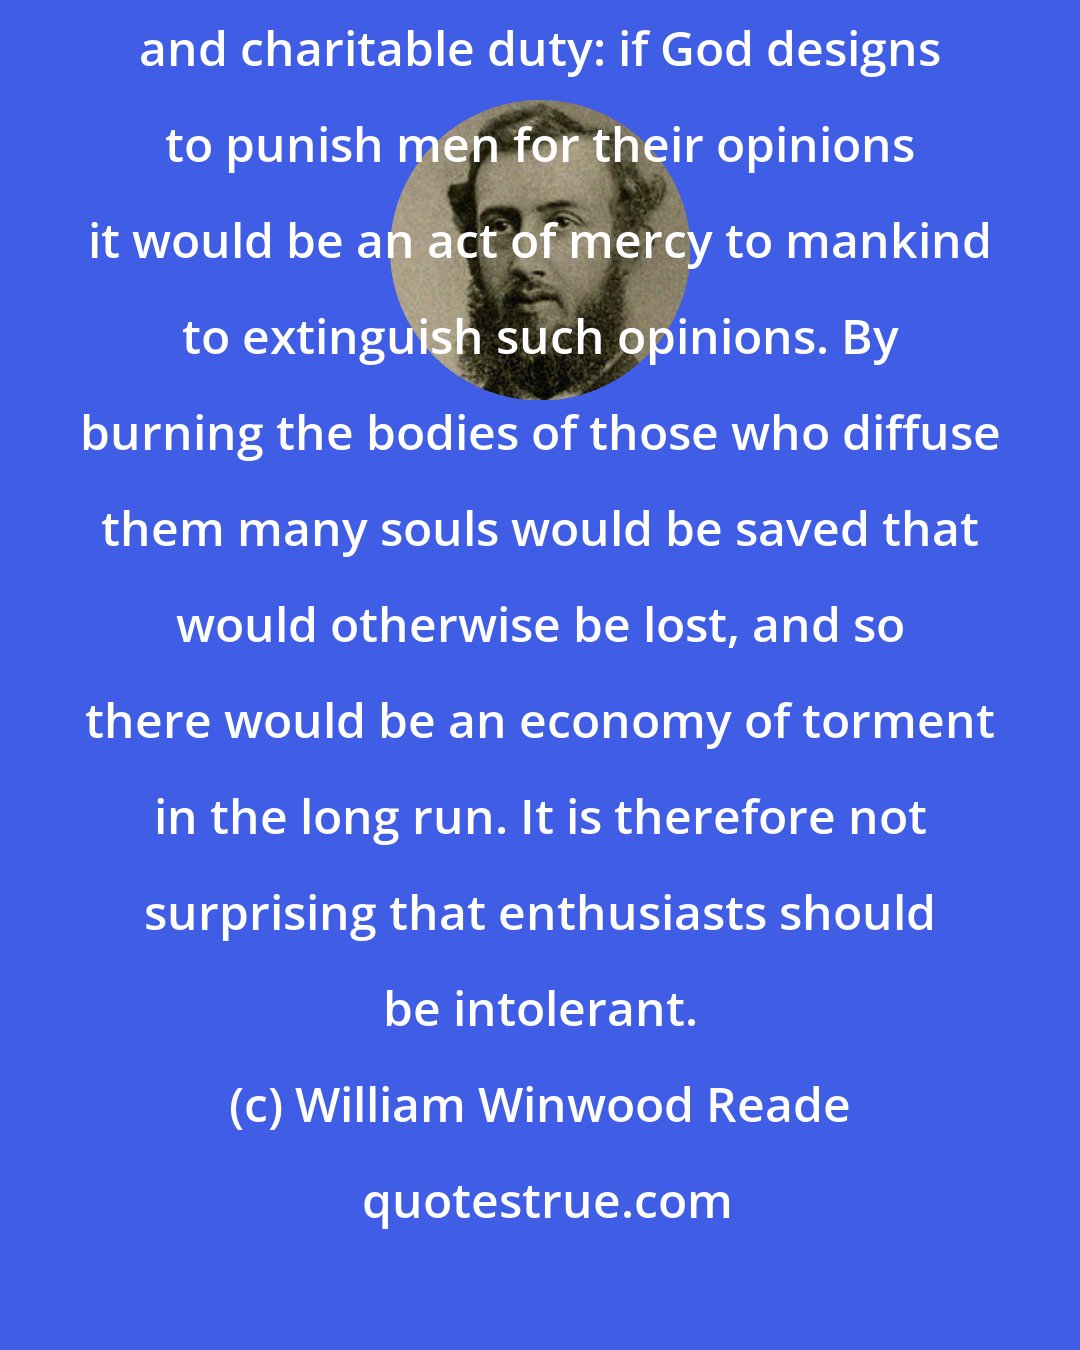 William Winwood Reade: If Christianity were true religious persecution would become a pious and charitable duty: if God designs to punish men for their opinions it would be an act of mercy to mankind to extinguish such opinions. By burning the bodies of those who diffuse them many souls would be saved that would otherwise be lost, and so there would be an economy of torment in the long run. It is therefore not surprising that enthusiasts should be intolerant.